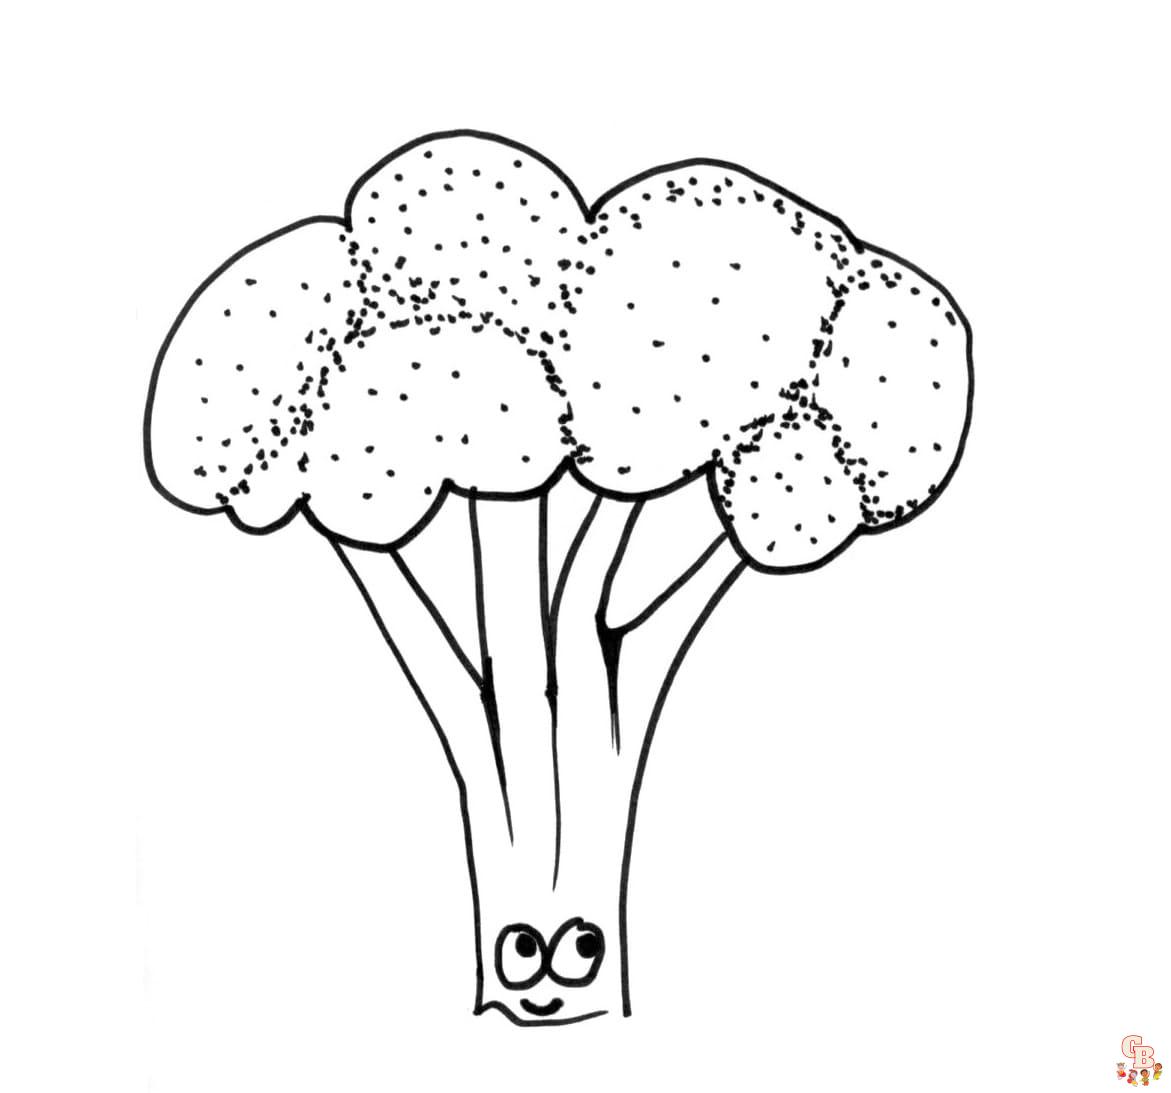 Broccoli coloring pages printable free